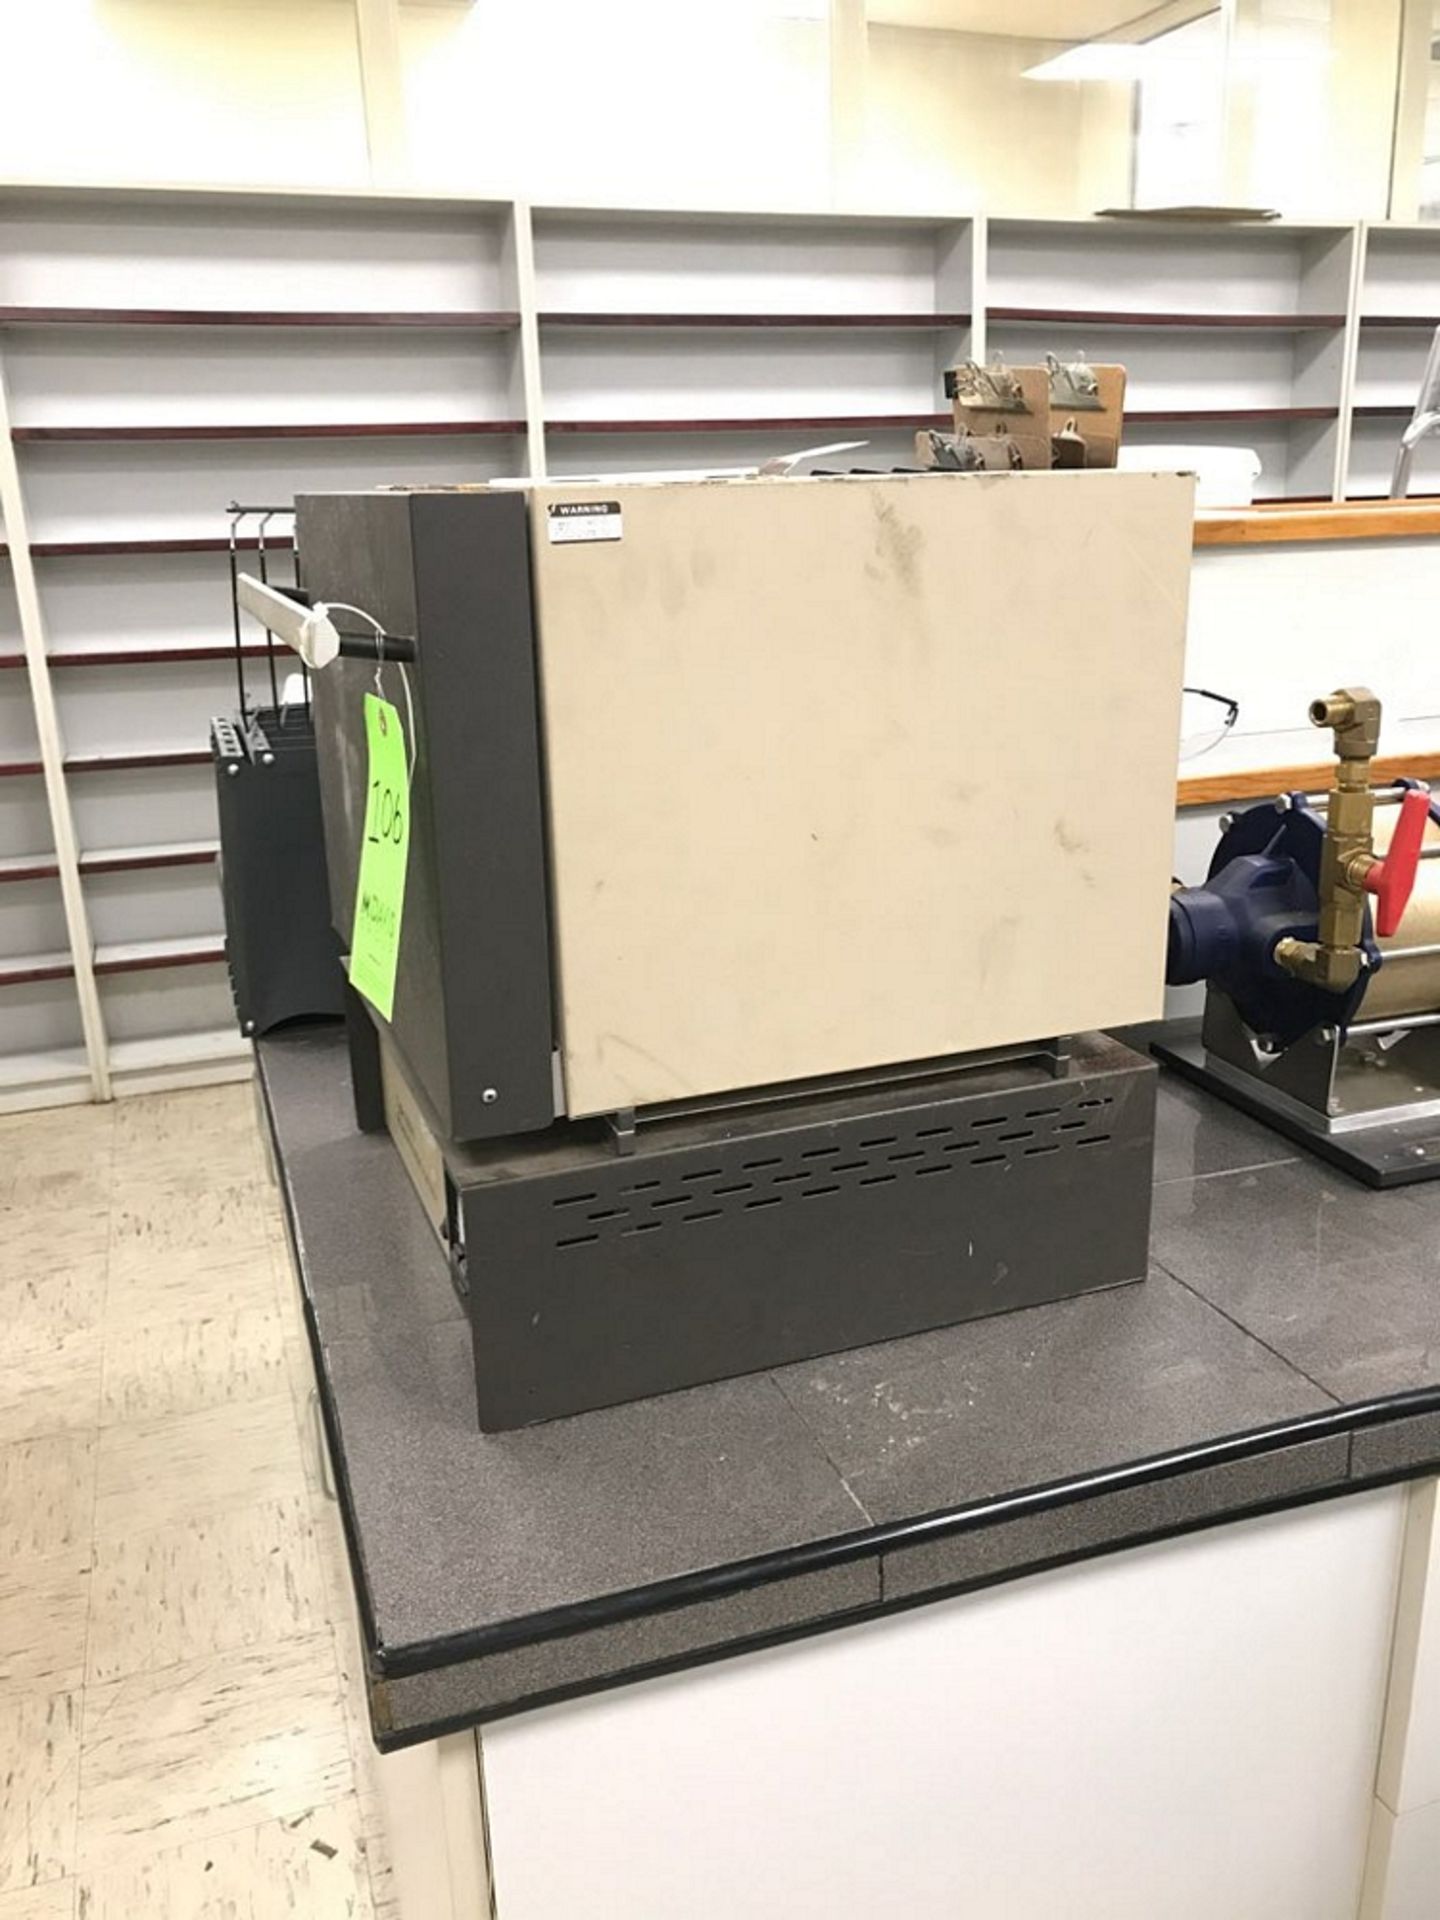 Thermolyne Programmable Furnace, Type 6000, M/N F6038C, S/N 40800214, 208 Volts, 1 Phase, 50/60 Hz - Image 3 of 5